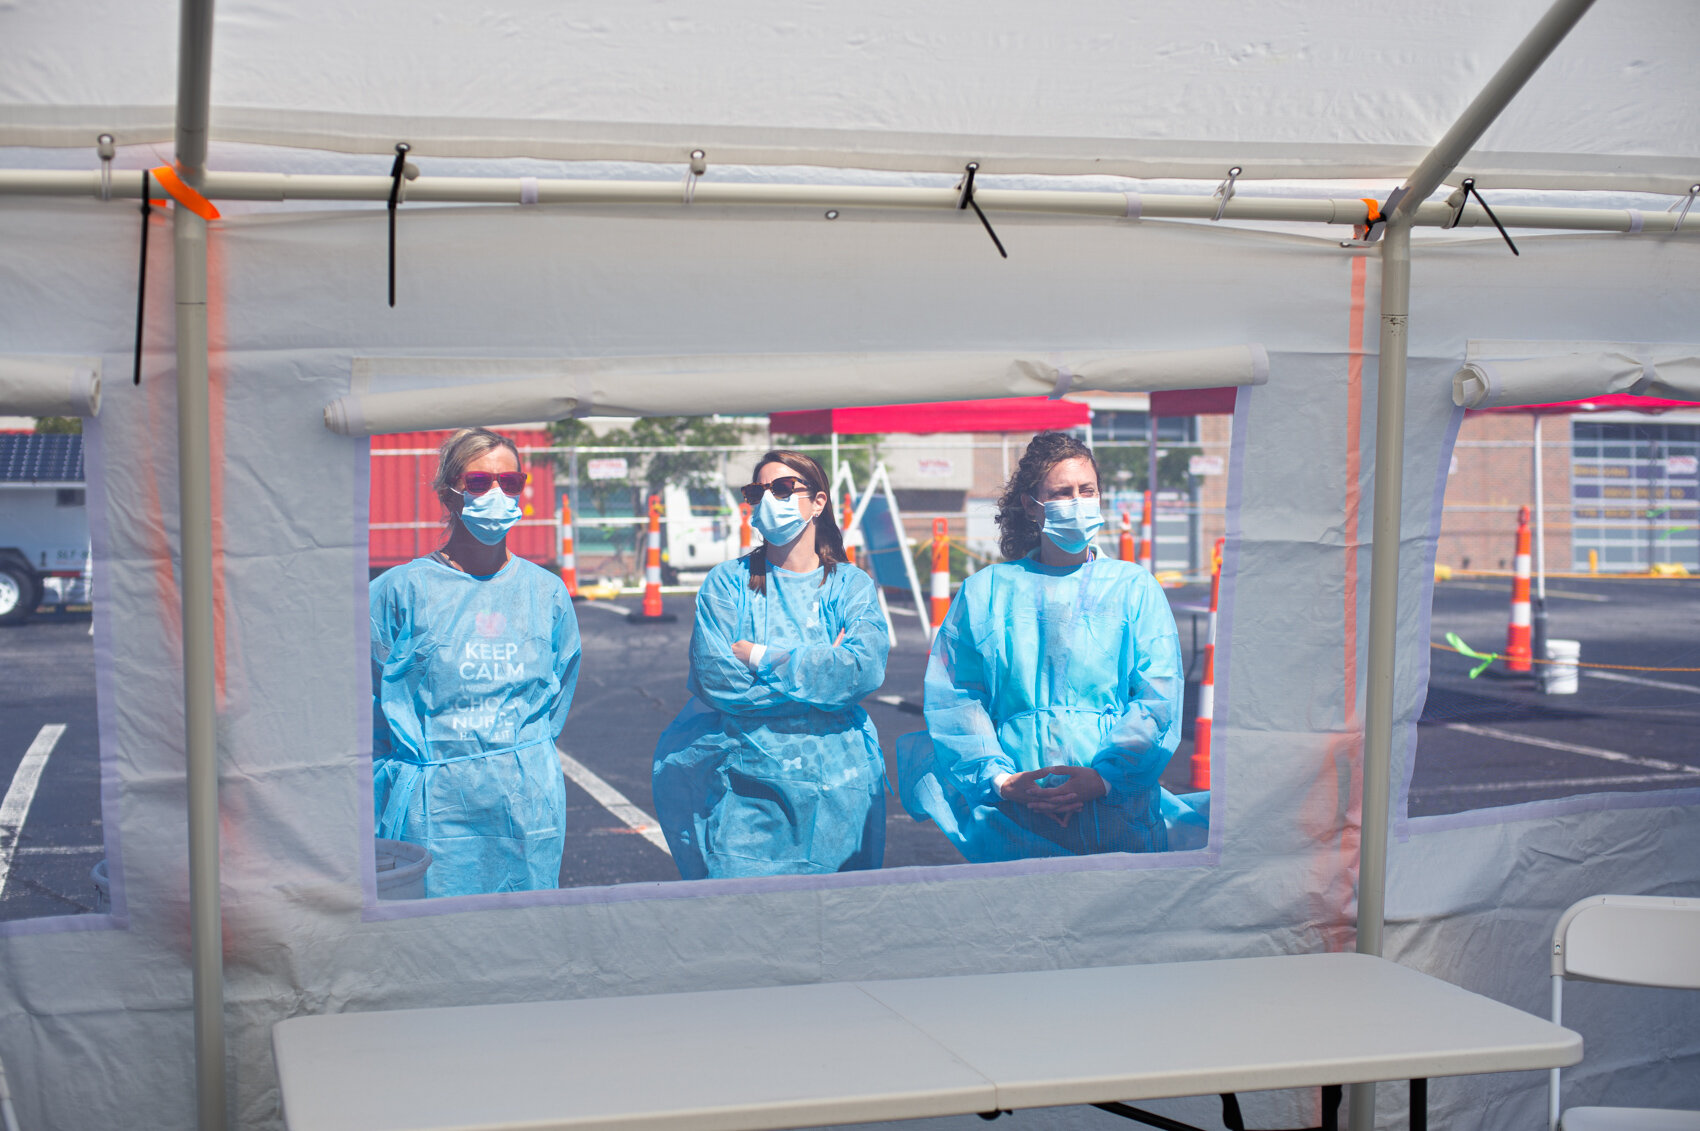  Public health nurses stand outside a drive-through tent where they will be administering nasal swabs for New Hanover County residents experiencing symptoms of Covid-19. (Port City Daily photo/Mark Darrough) 